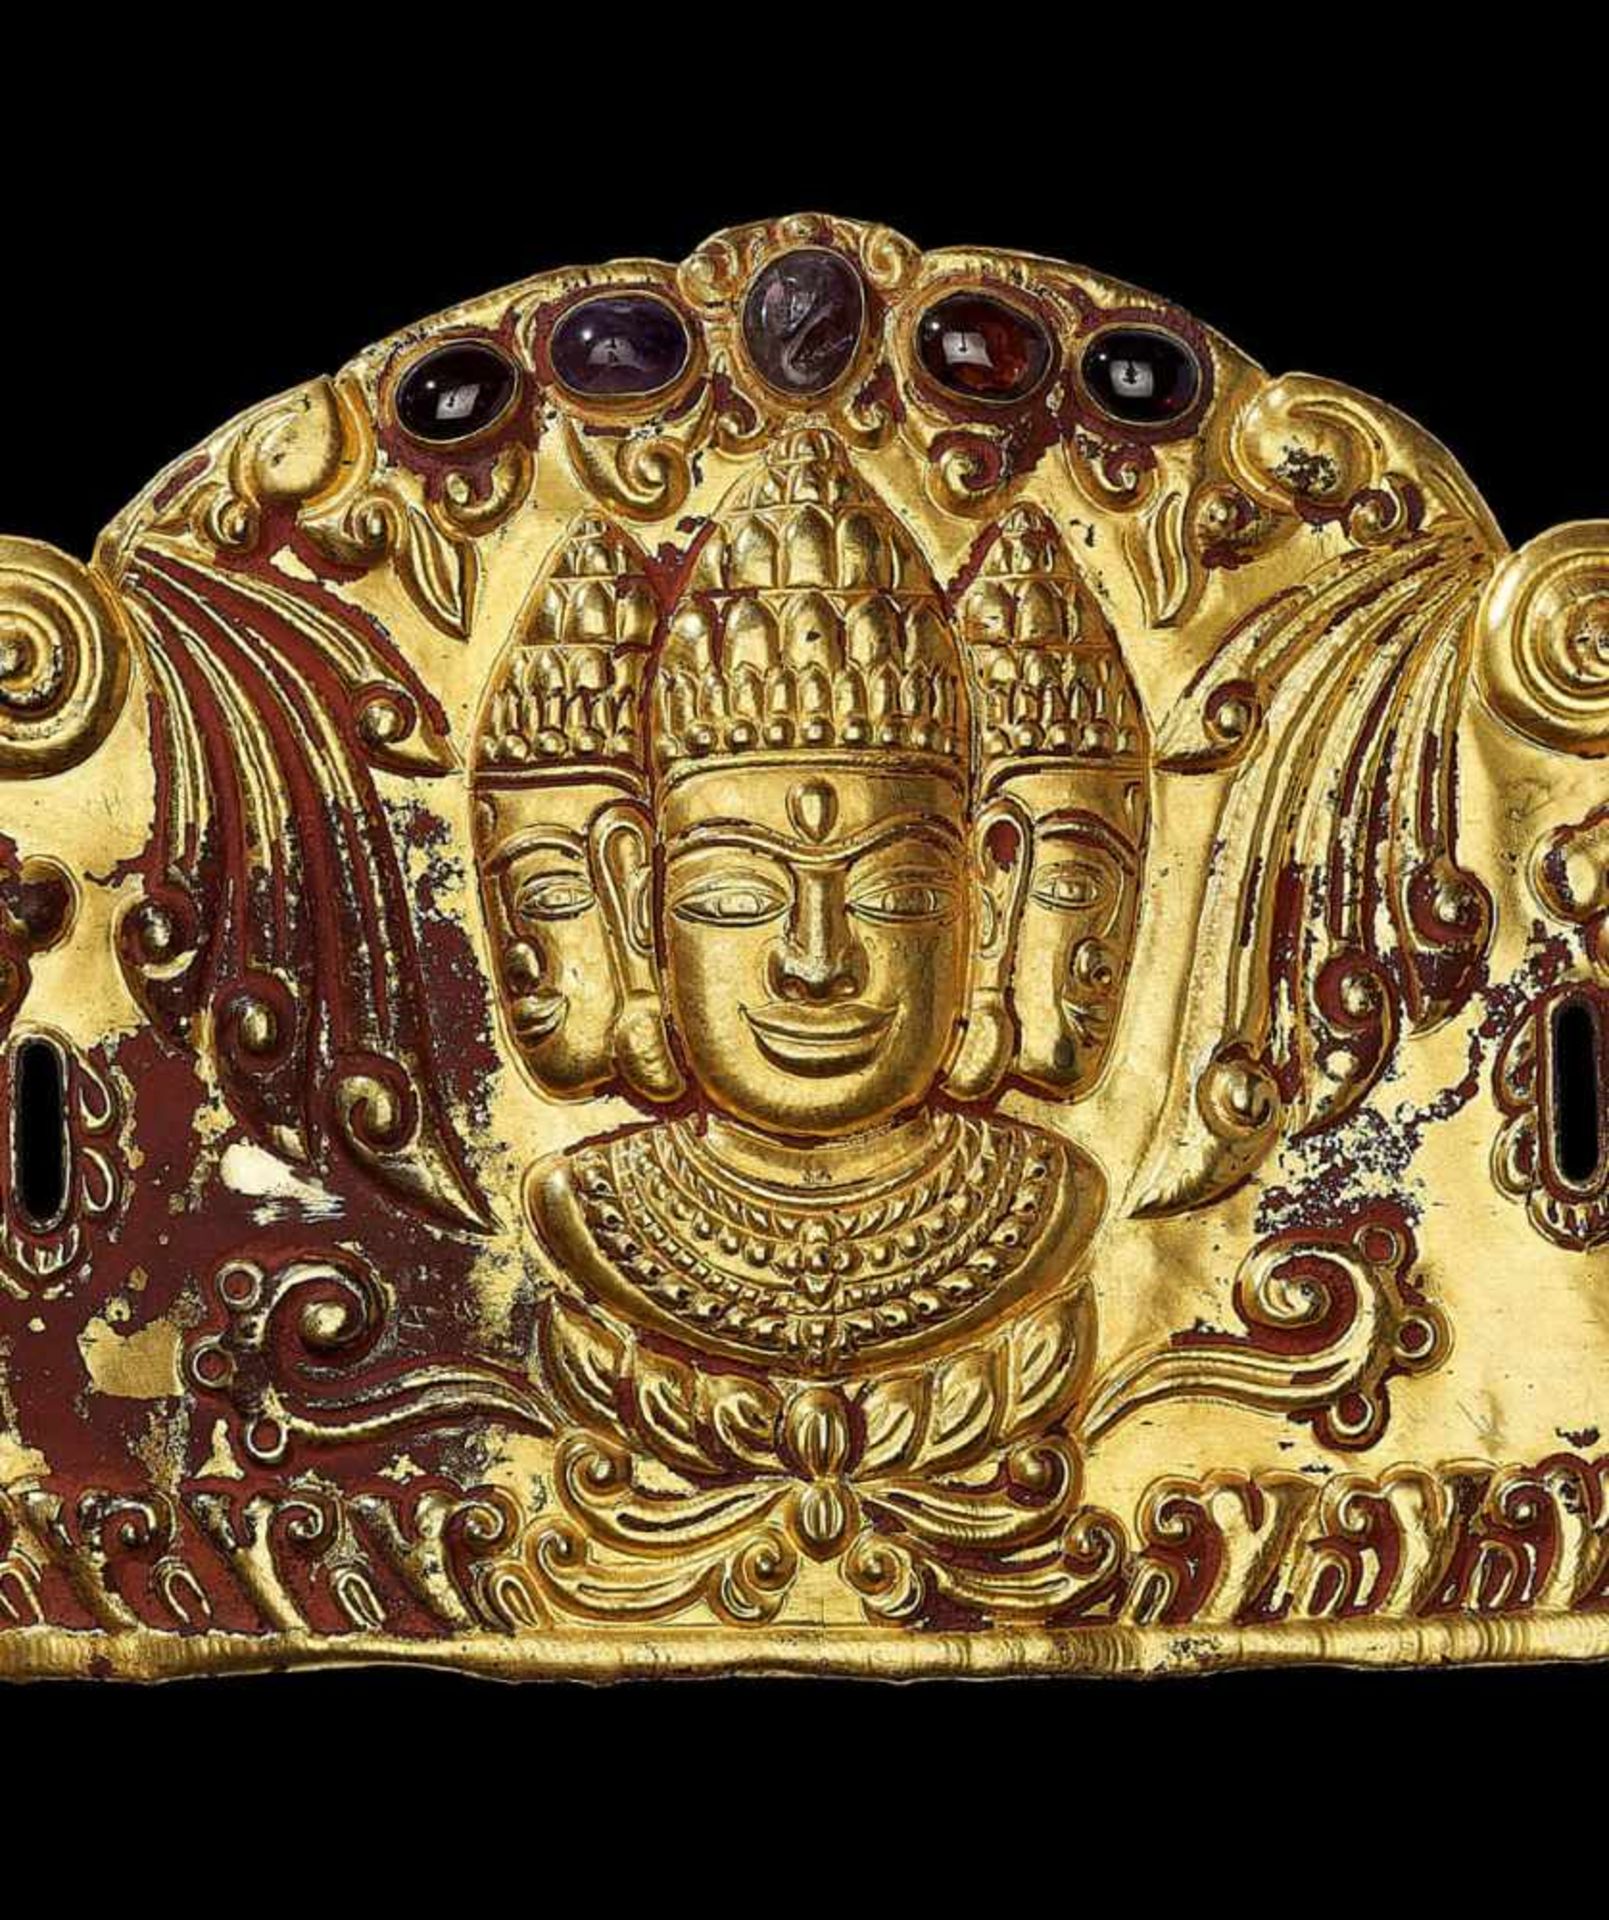 AN EXCELLENT AND VERY RARE CHAM REPOUSSÉ GOLD DIADEM DEPICTING BRAHMA Central Cham kingdom, - Image 2 of 3